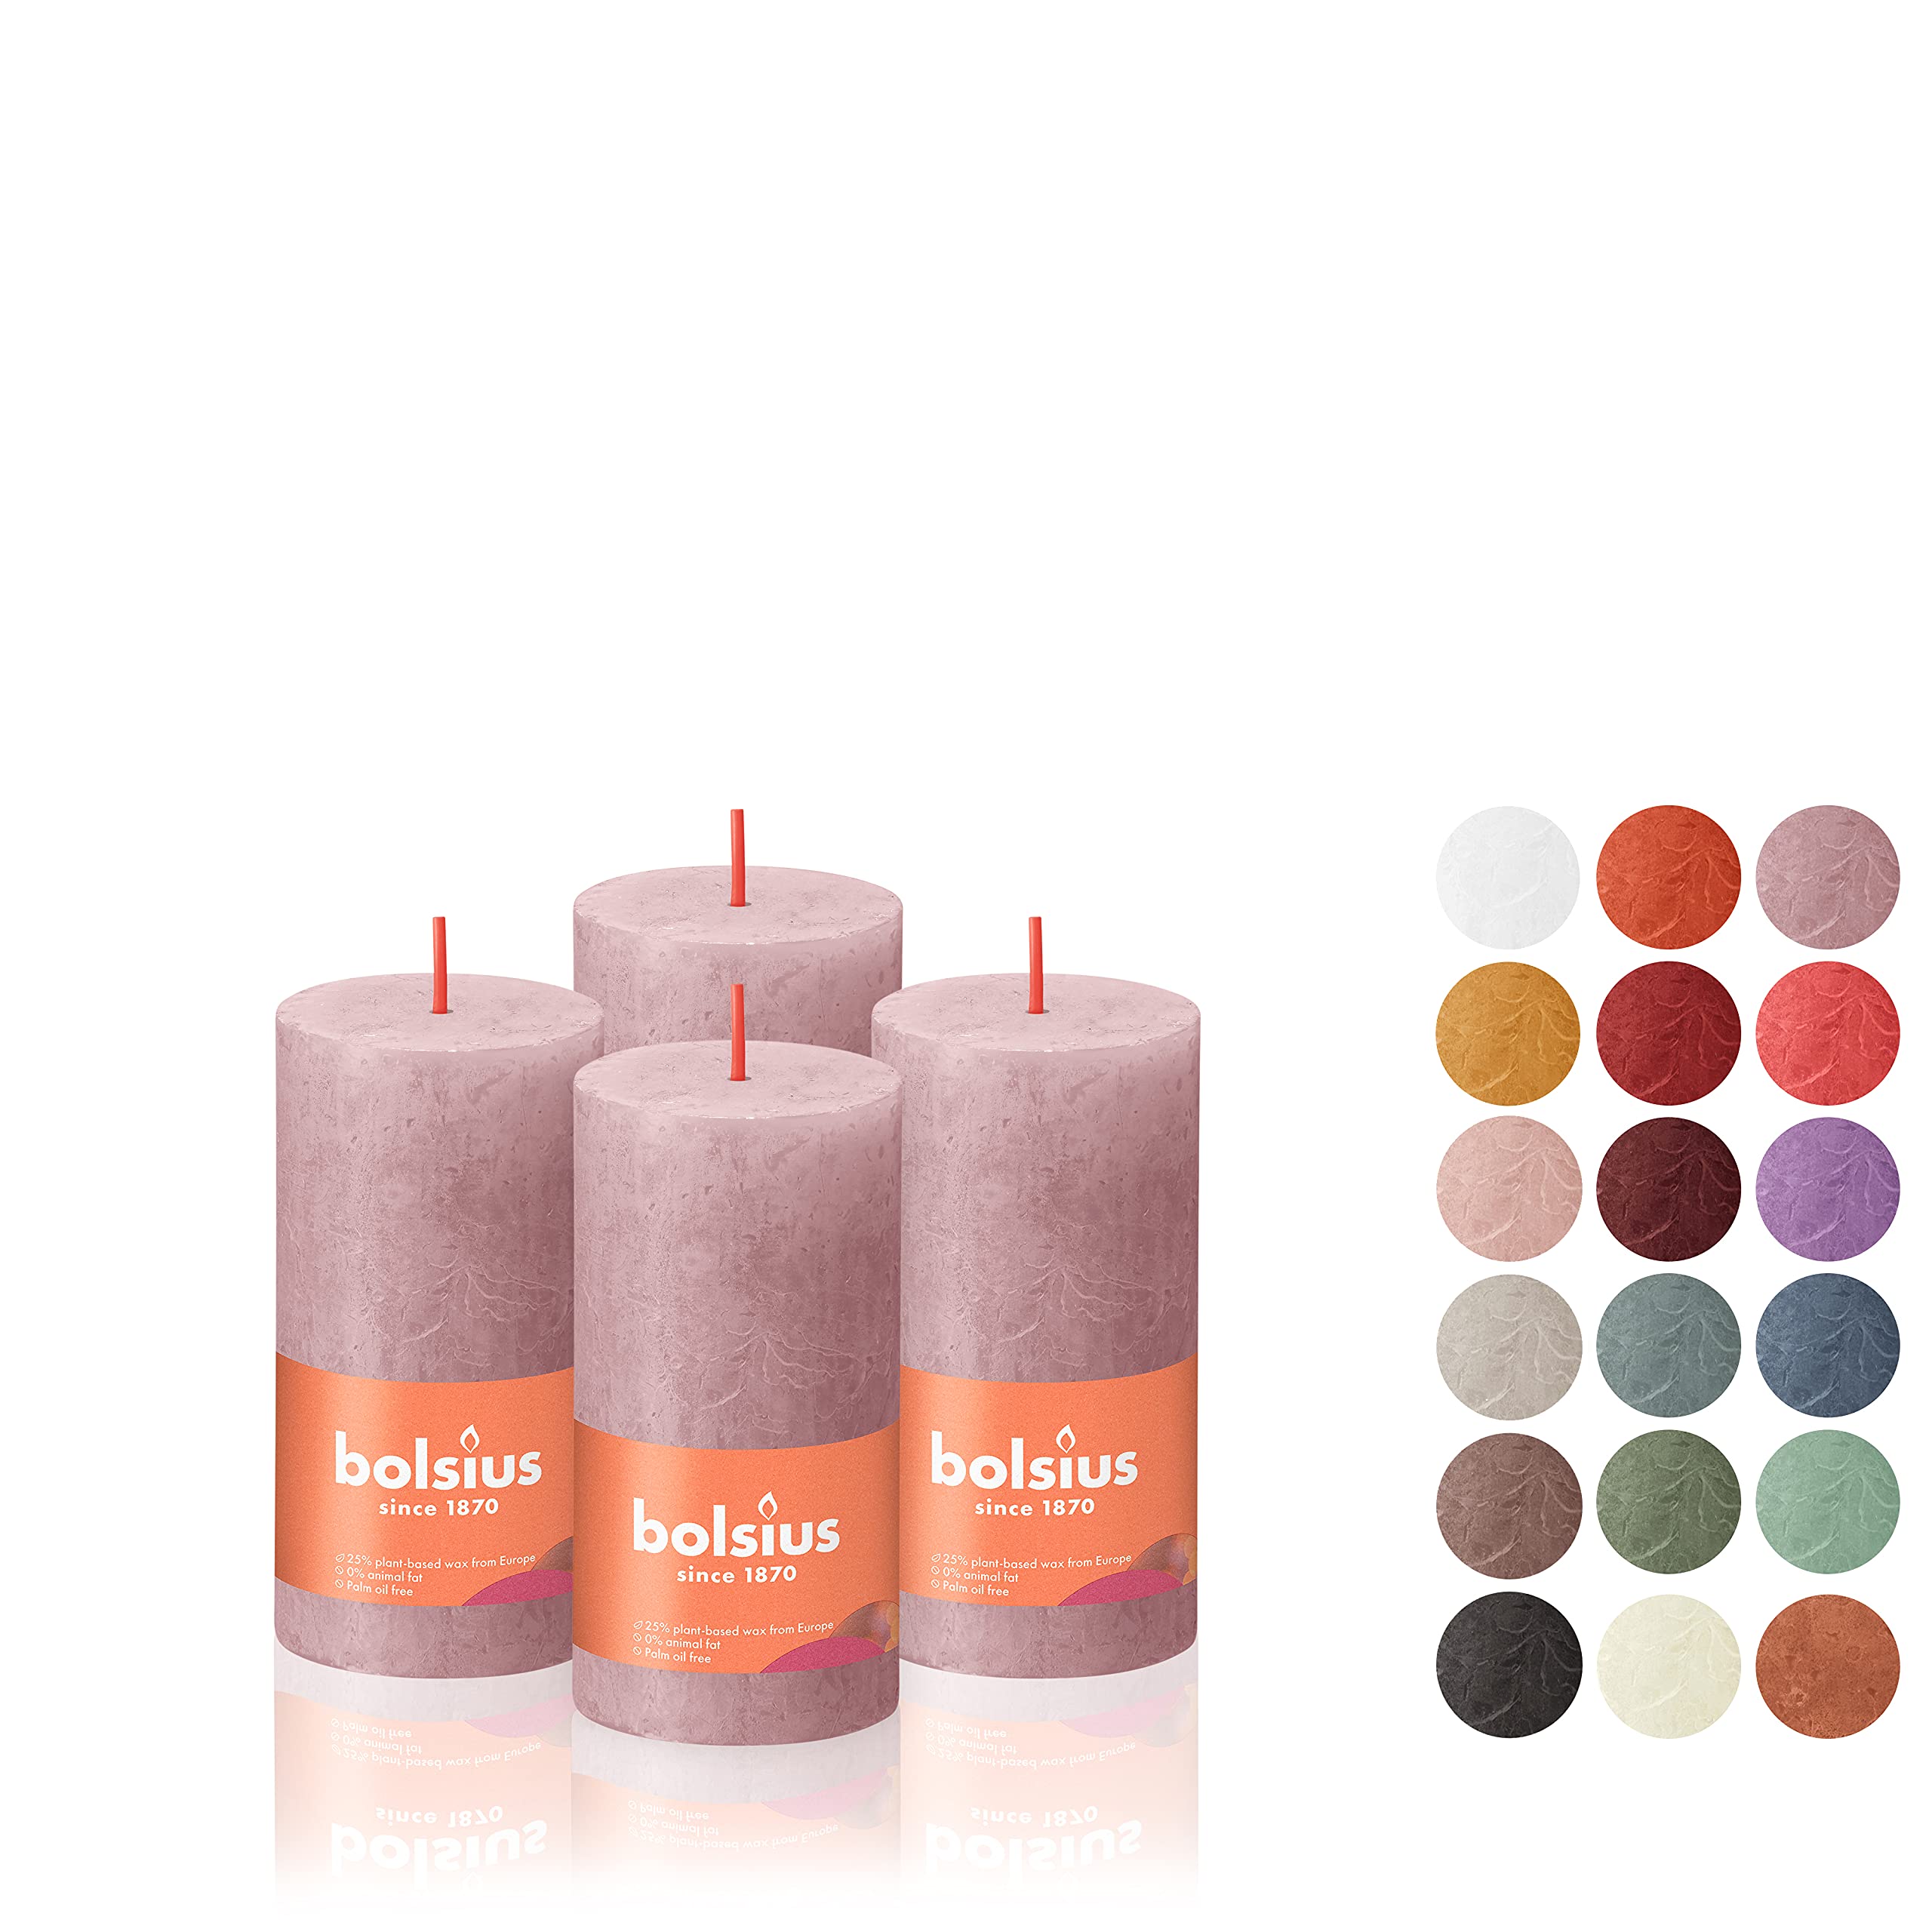 BOLSIUS 4 Pack Ash Rose Rustic Pillar Candles - 2 X 4 Inches - Premium European Quality - Includes Natural Plant-Based Wax - Unscented Dripless Smokeless 30 Hour Party D�cor and Wedding Candles  - Very Good